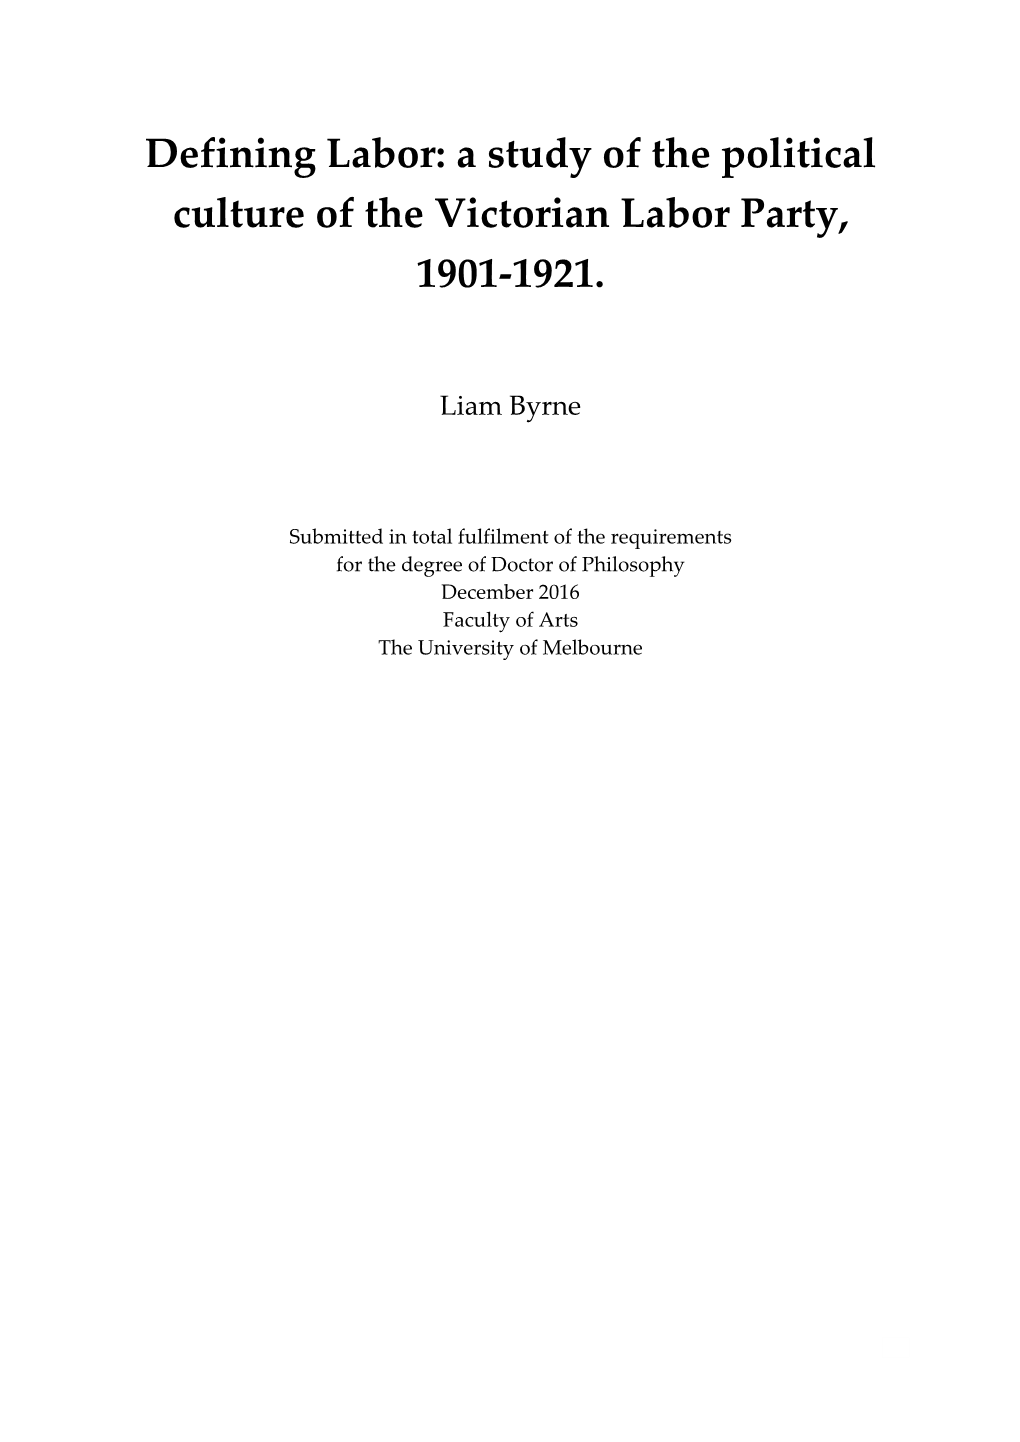 Defining Labor: a Study of the Political Culture of the Victorian Labor Party, 1901-1921